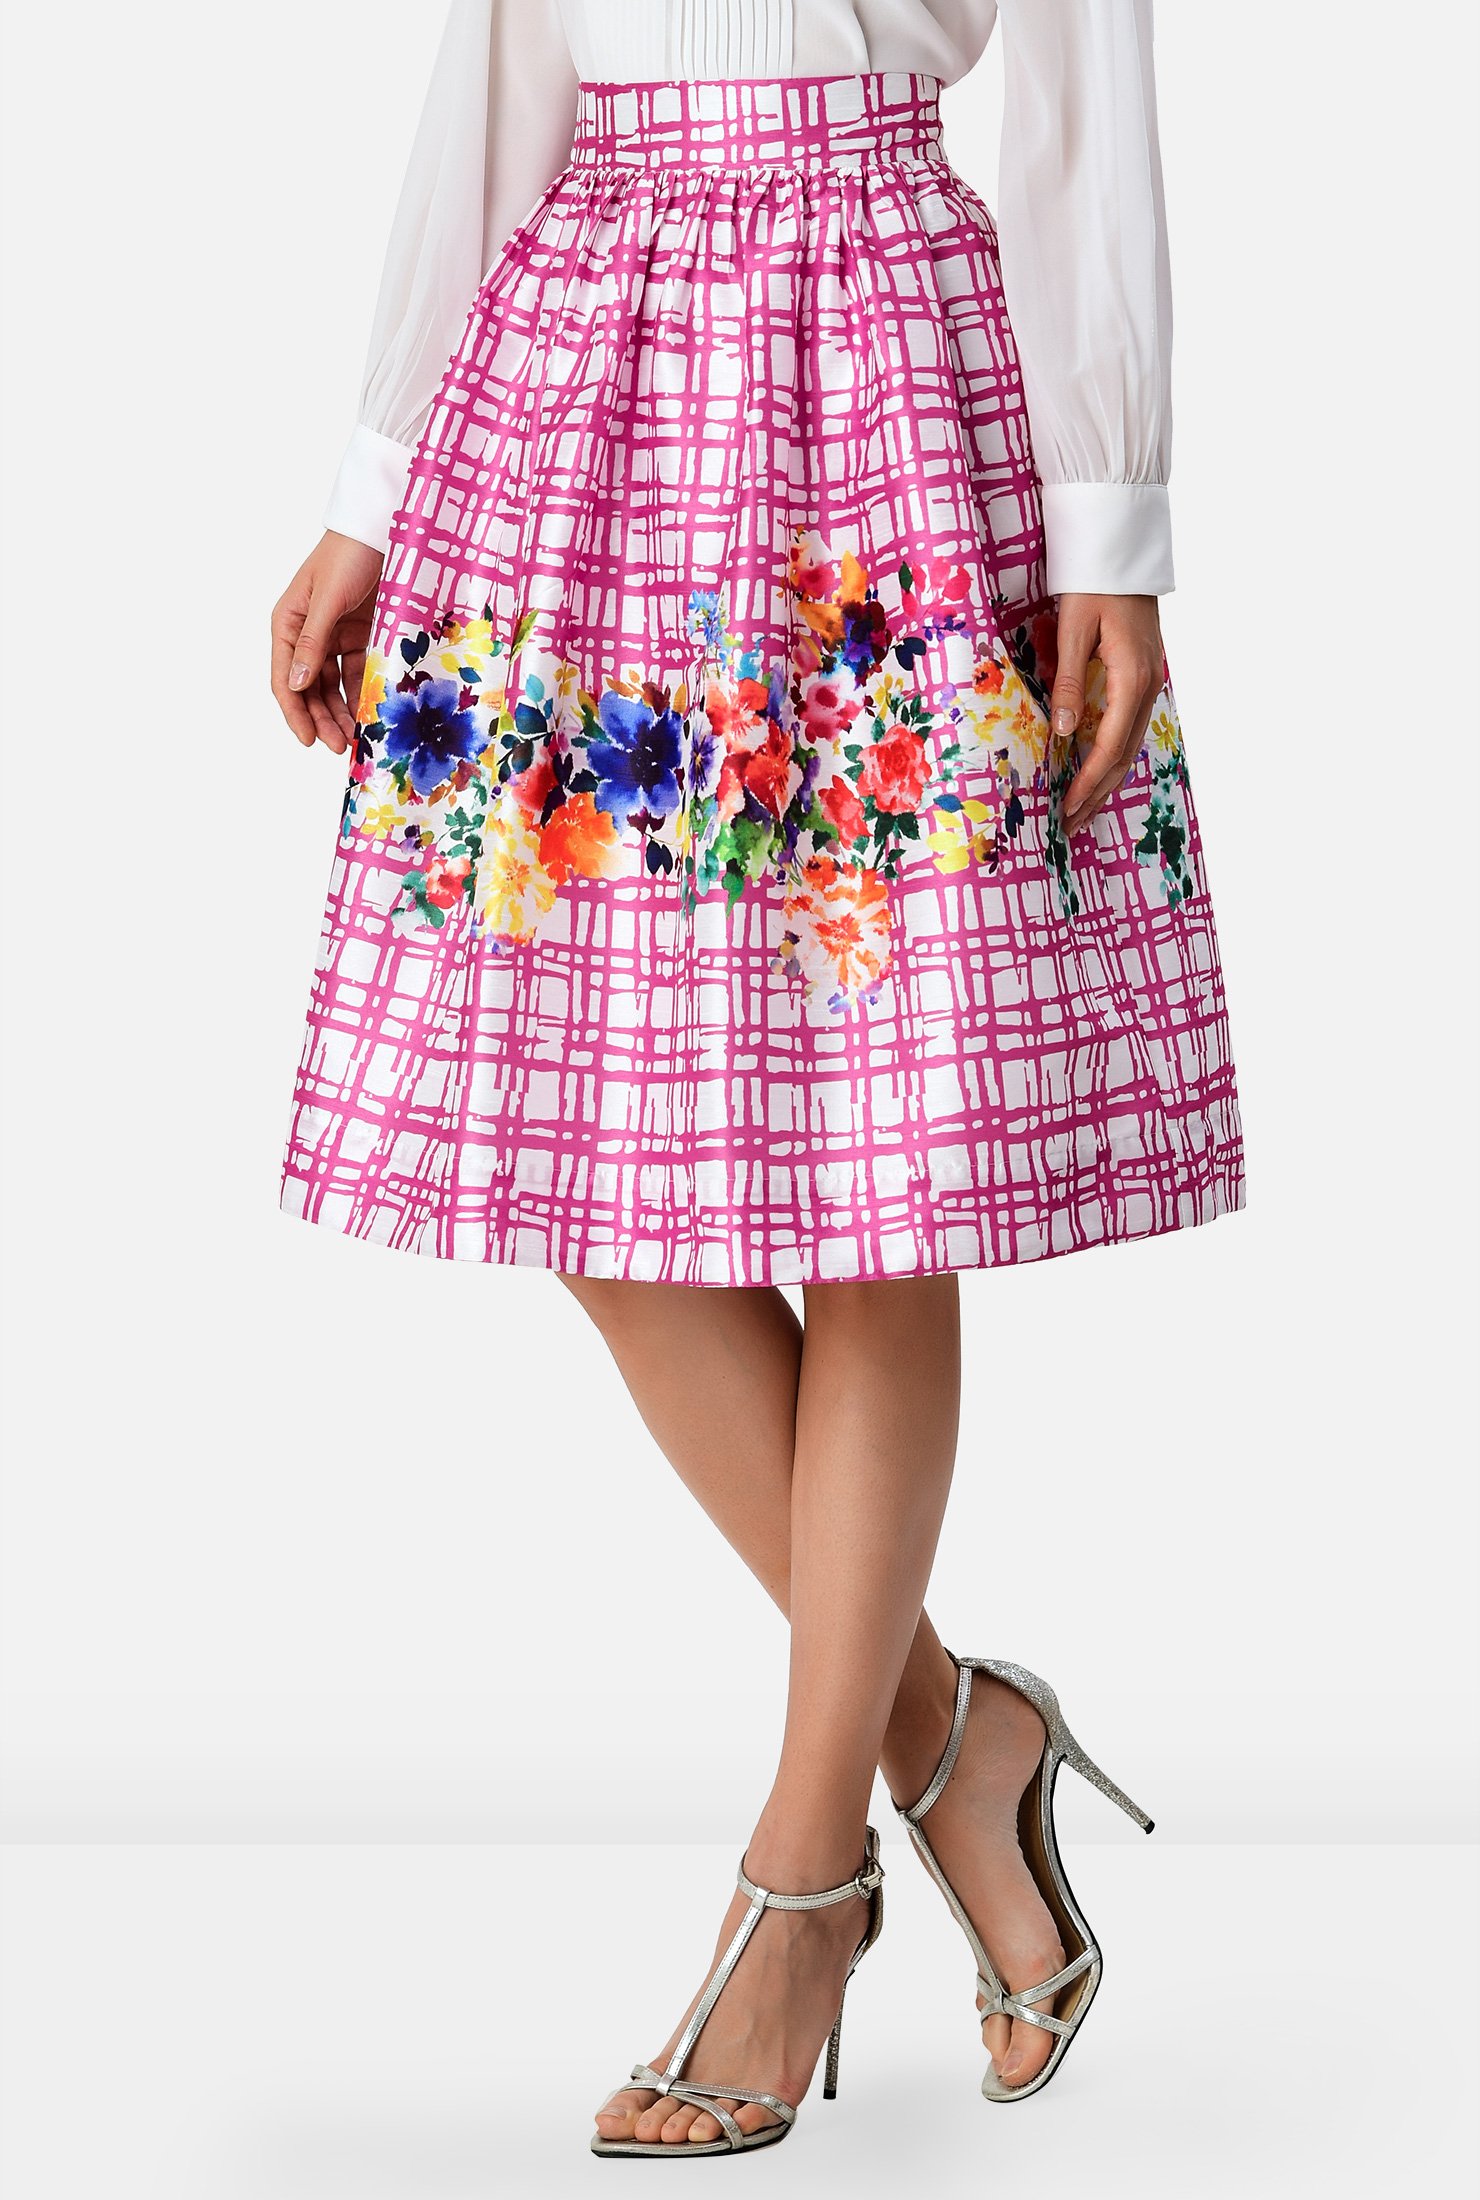 Watercolor florals pop up in vibrant hues on our check print poly-dupioni skirt styled with a banded waist and ruched pleating for a full flare.